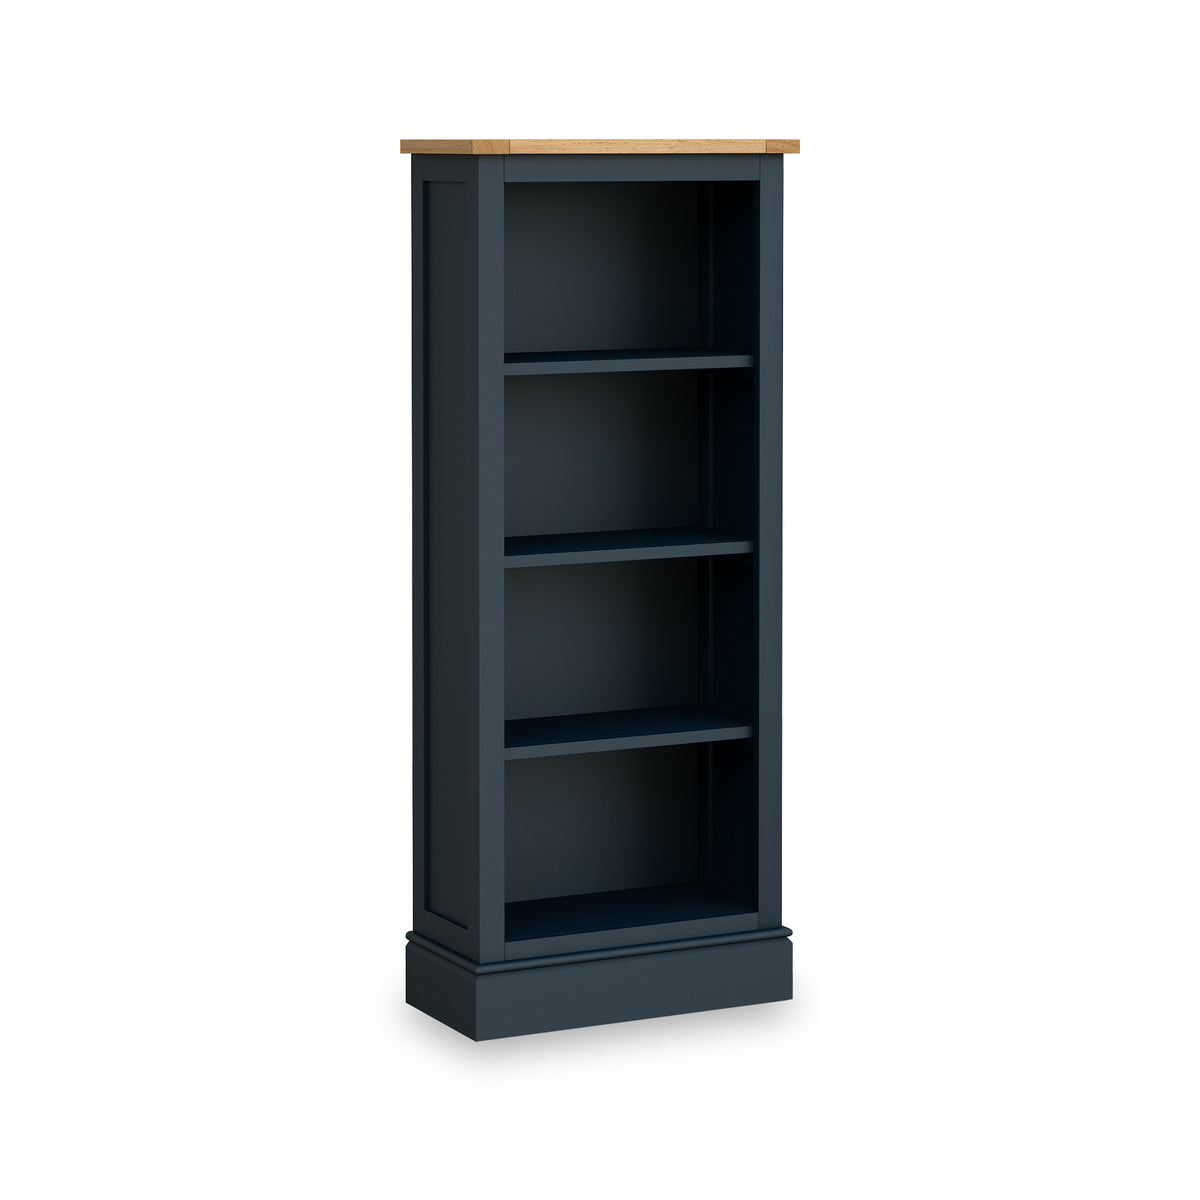 Bude Navy Blue Slim Bookcase with Painted Shelves from Roseland Furniture